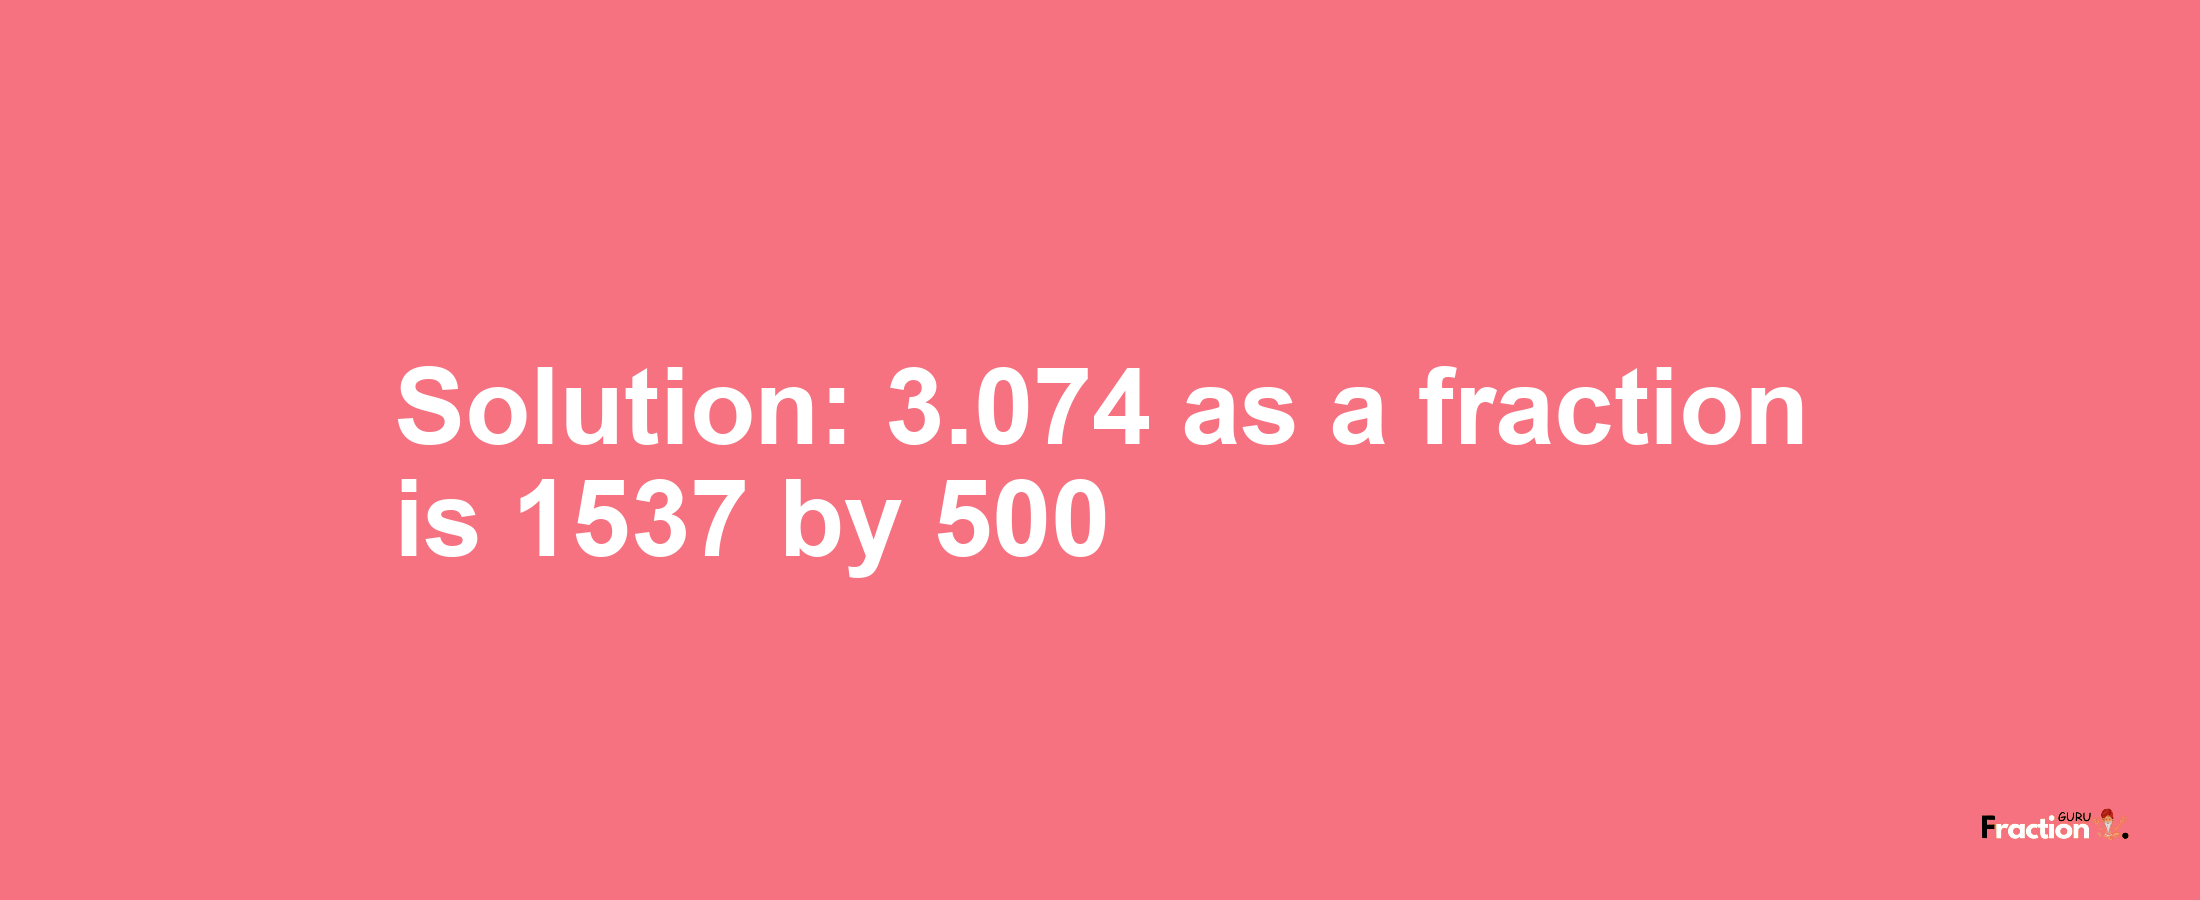 Solution:3.074 as a fraction is 1537/500